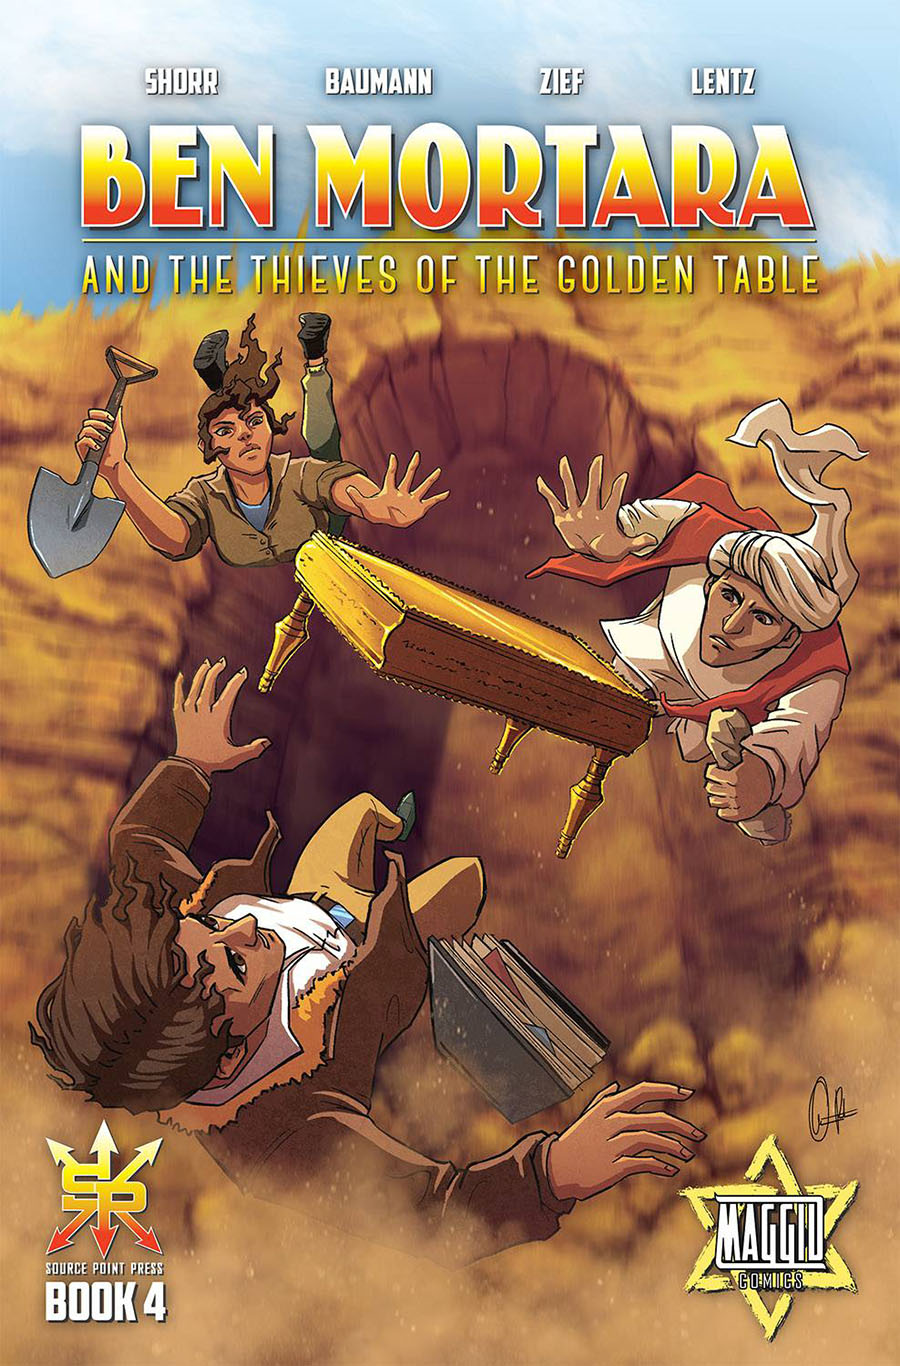 Ben Mortara And The Thieves Of The Golden Table #4